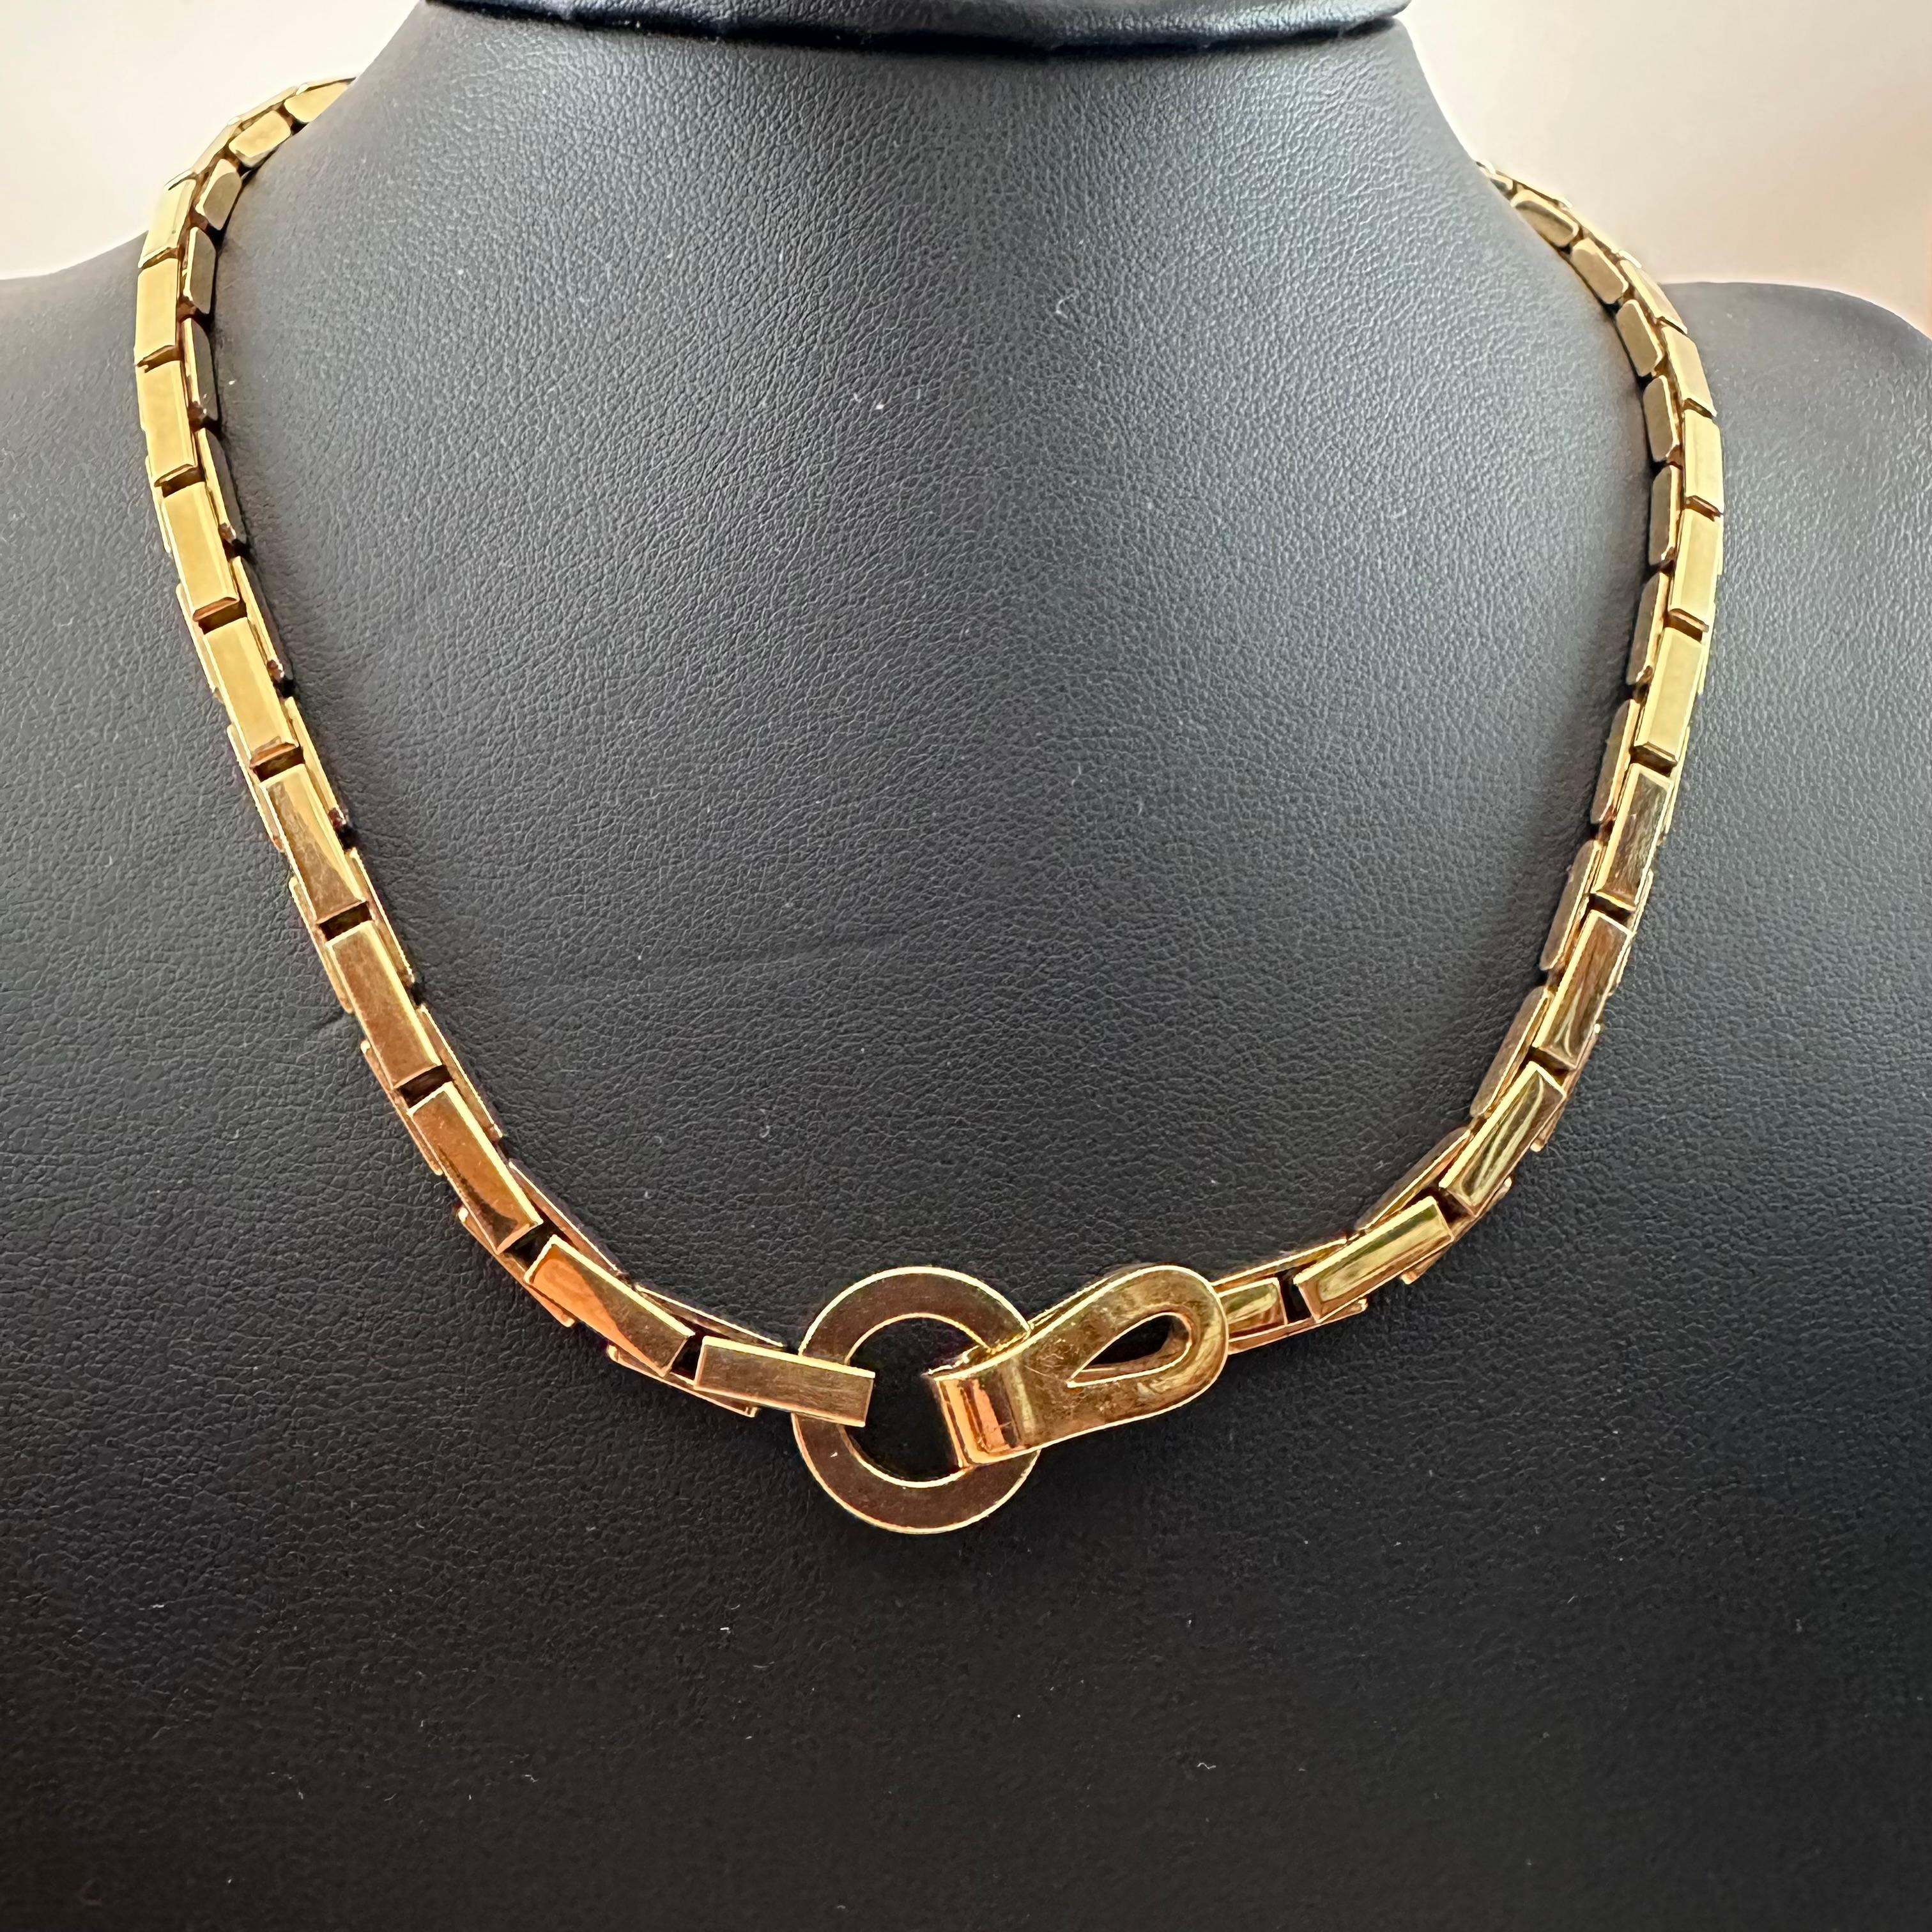 Cartier Agrafe Necklace  In Good Condition For Sale In Beverly Hills, CA